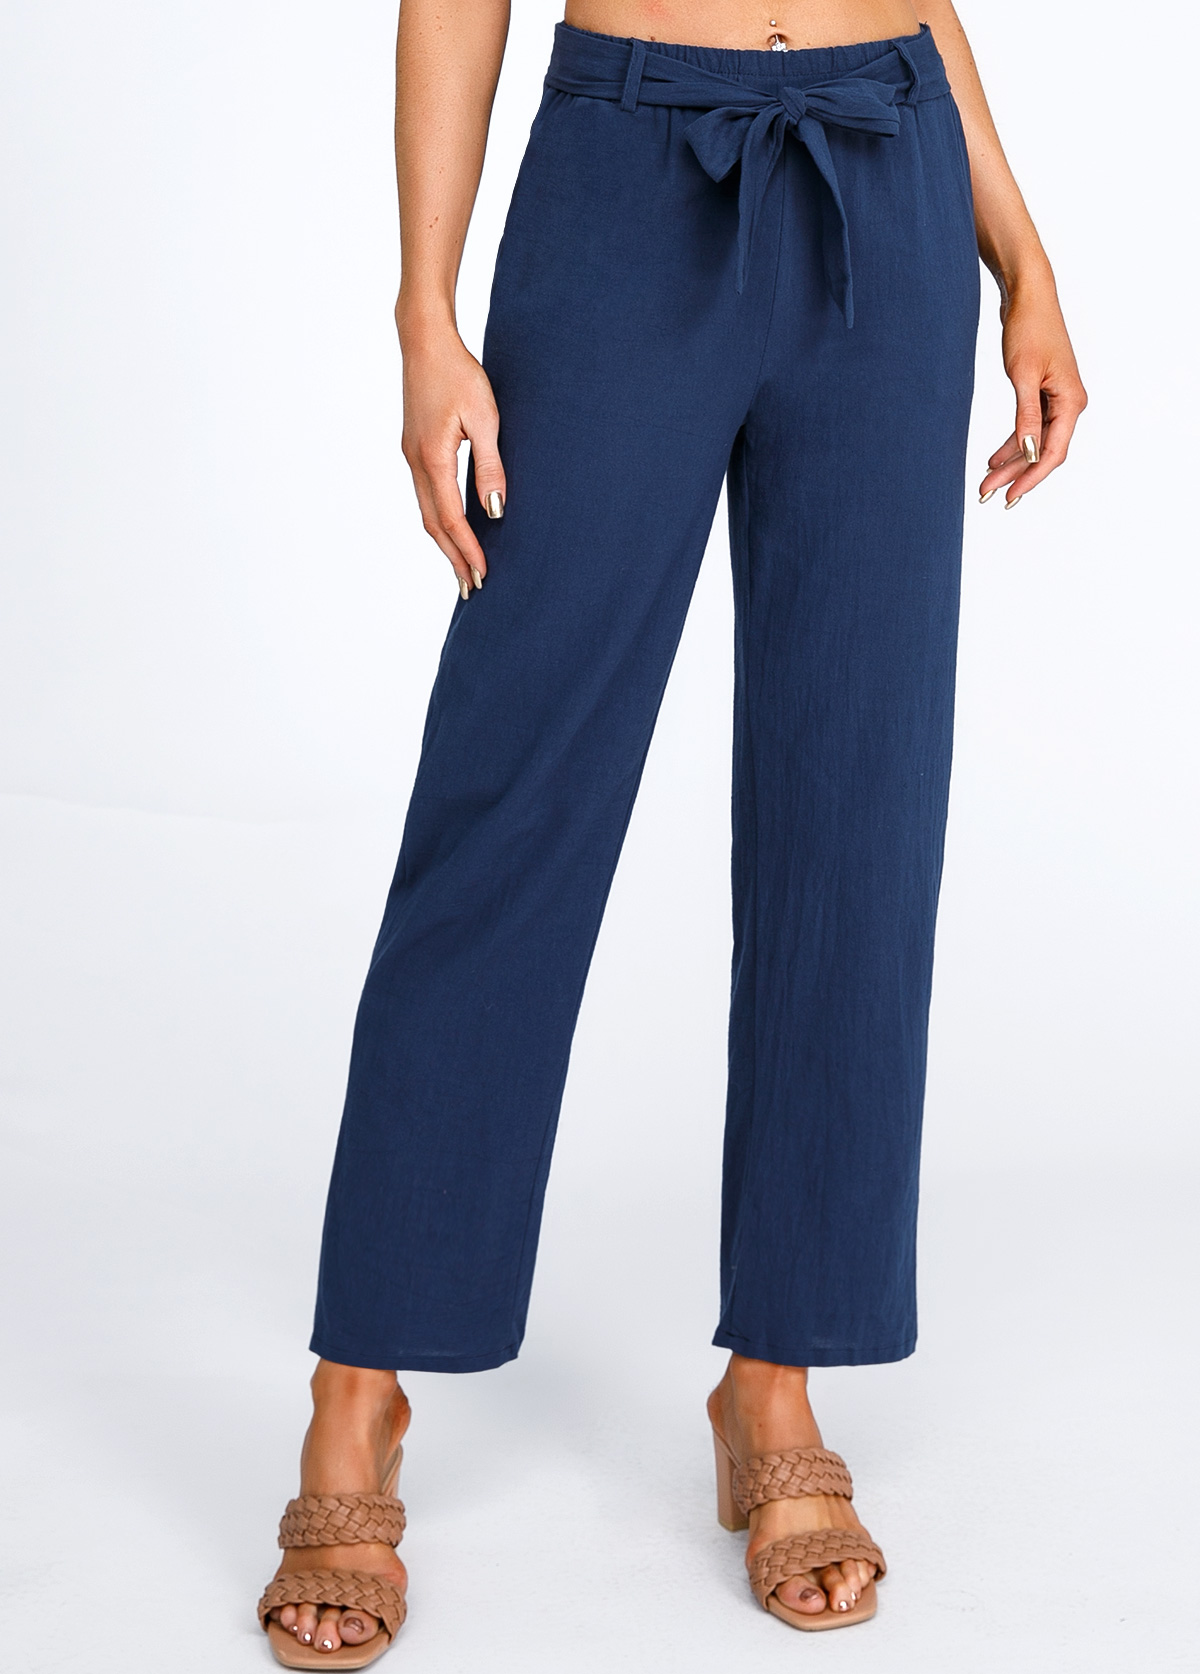 Navy Bowknot Belted High Waisted Pants